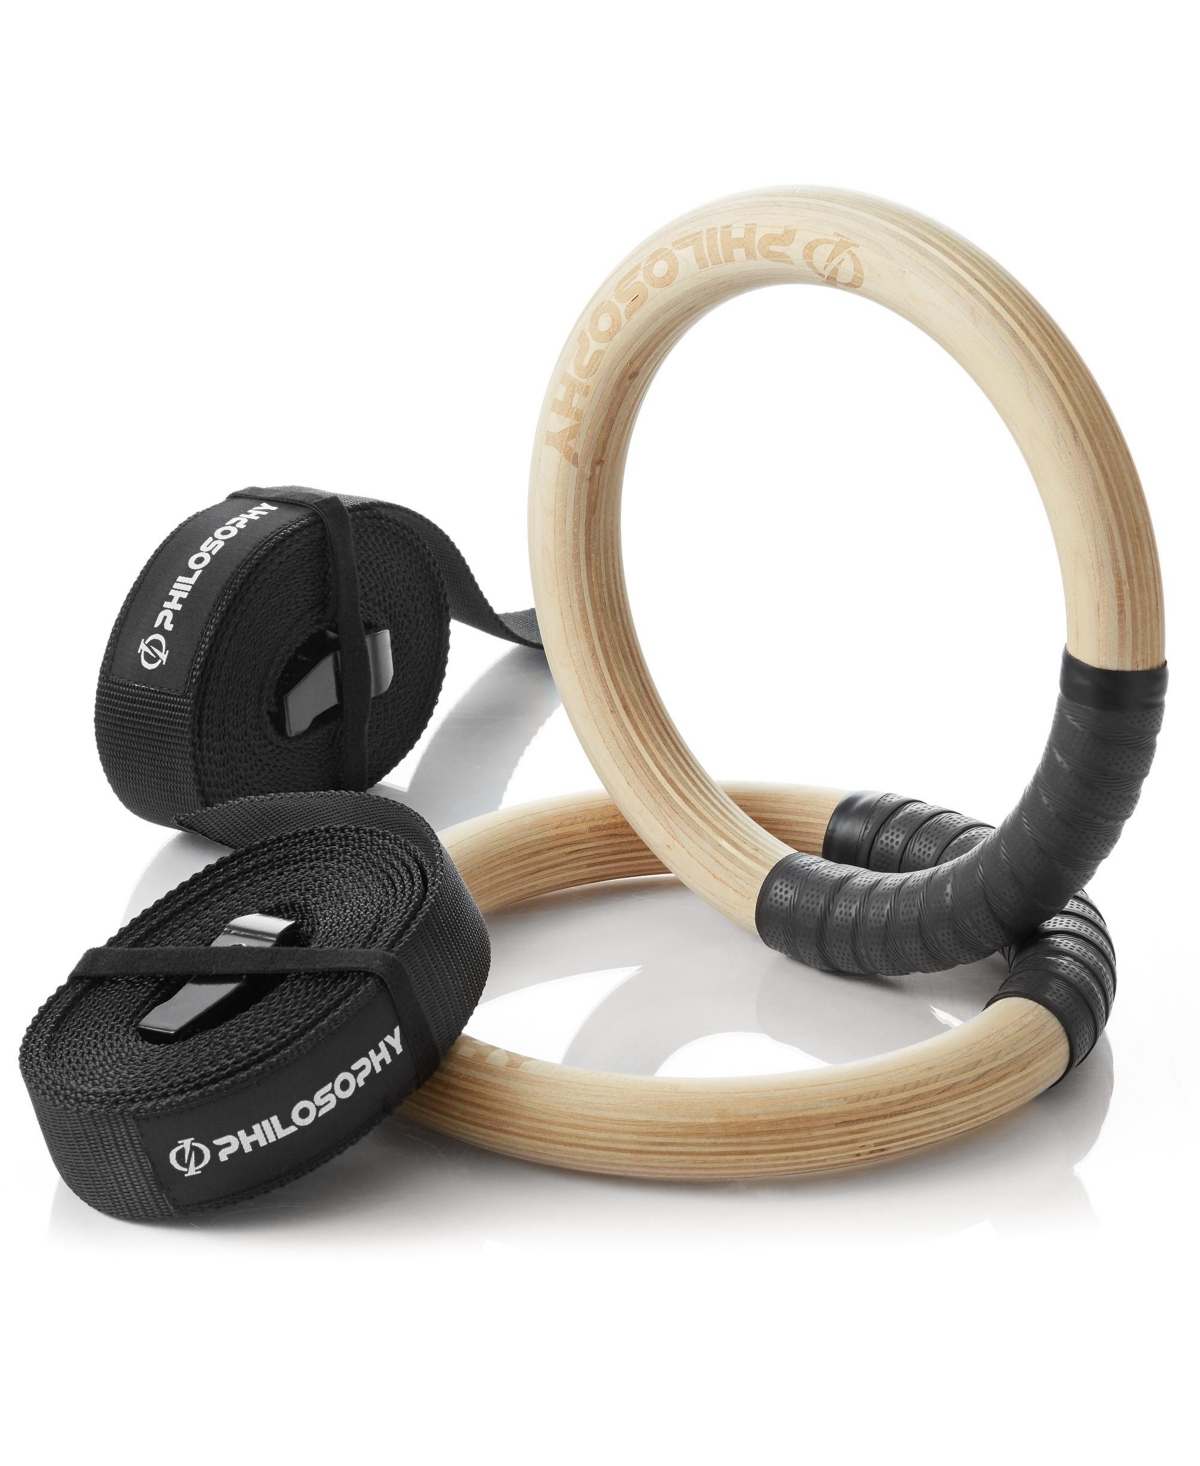 Wood Gymnastic Rings 1" - Exercise Ring Set Grip with Adjustable Straps, Grip Tape for Pull Ups, Dips, Muscle Ups - Wood